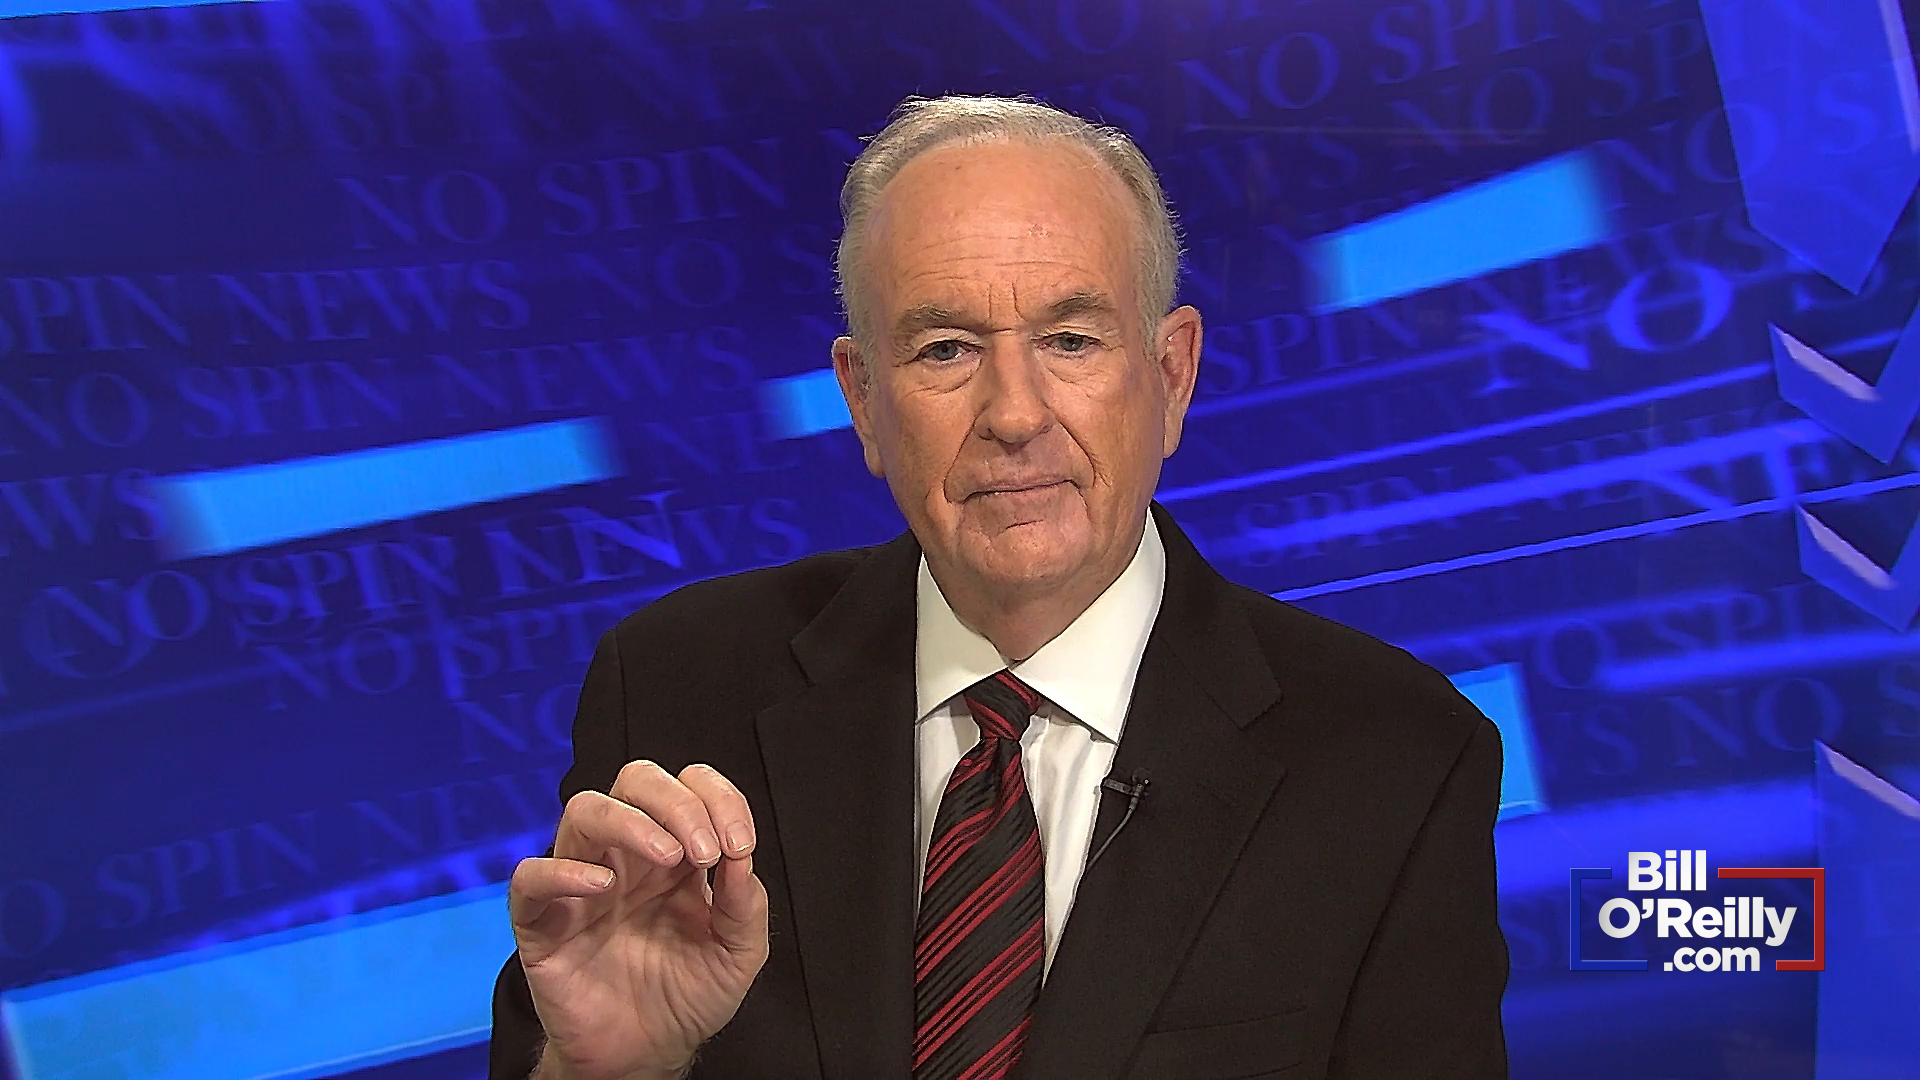 O'Reilly: Save As Many Unborn Babies As Possible